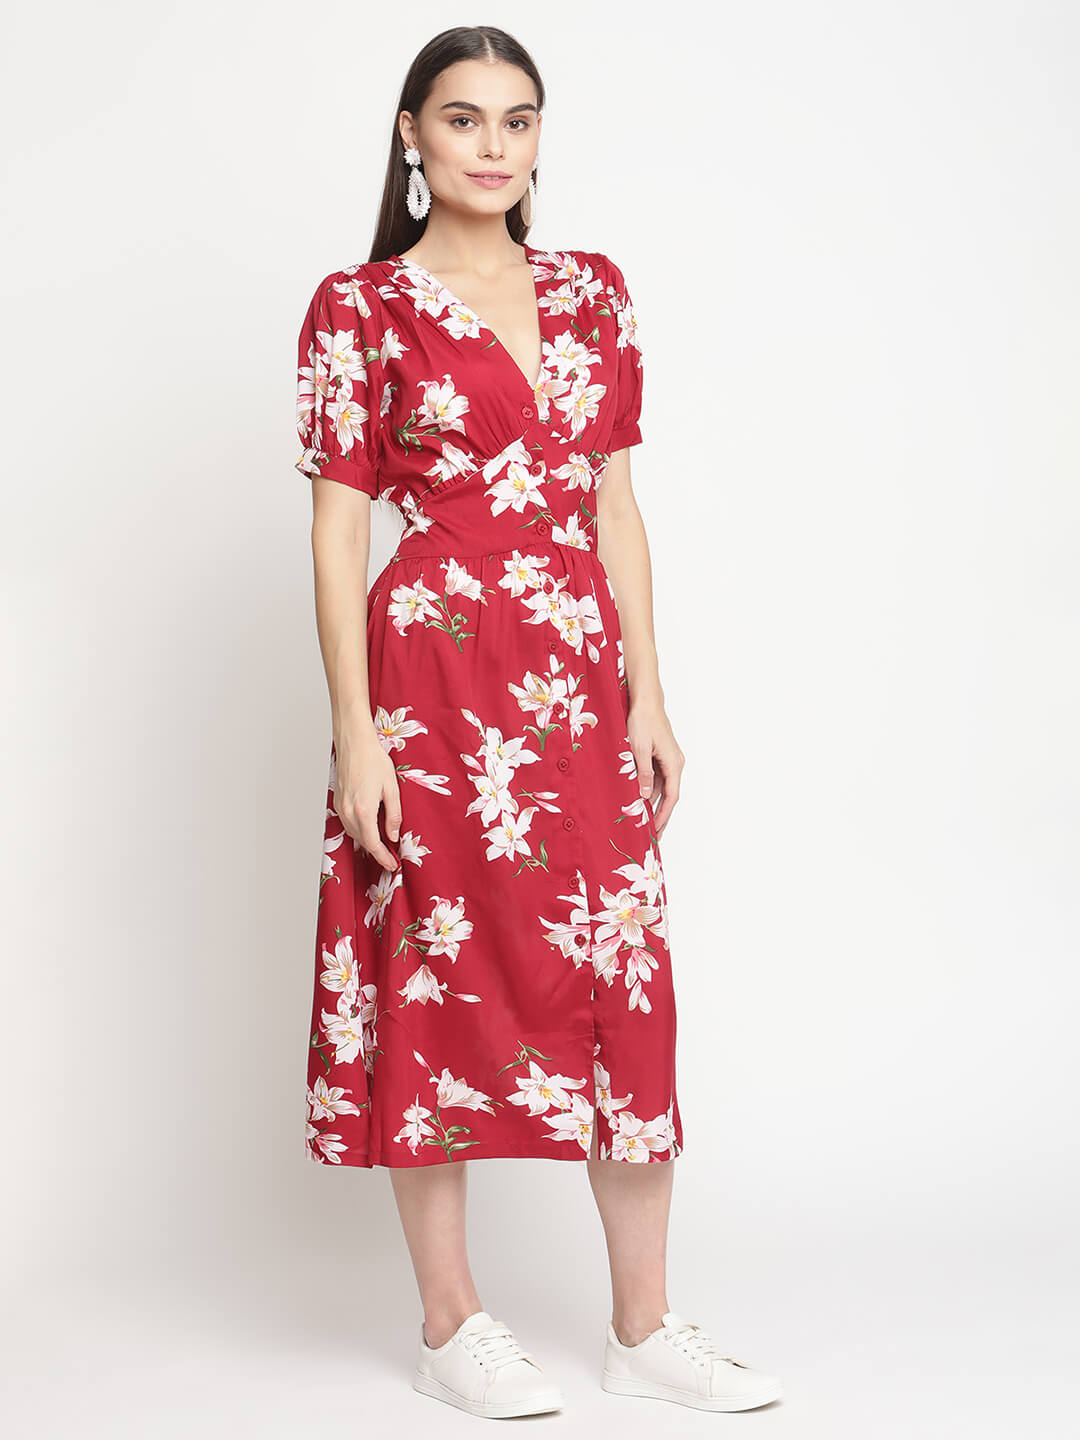 Printed Shirt Dress With Front Slit